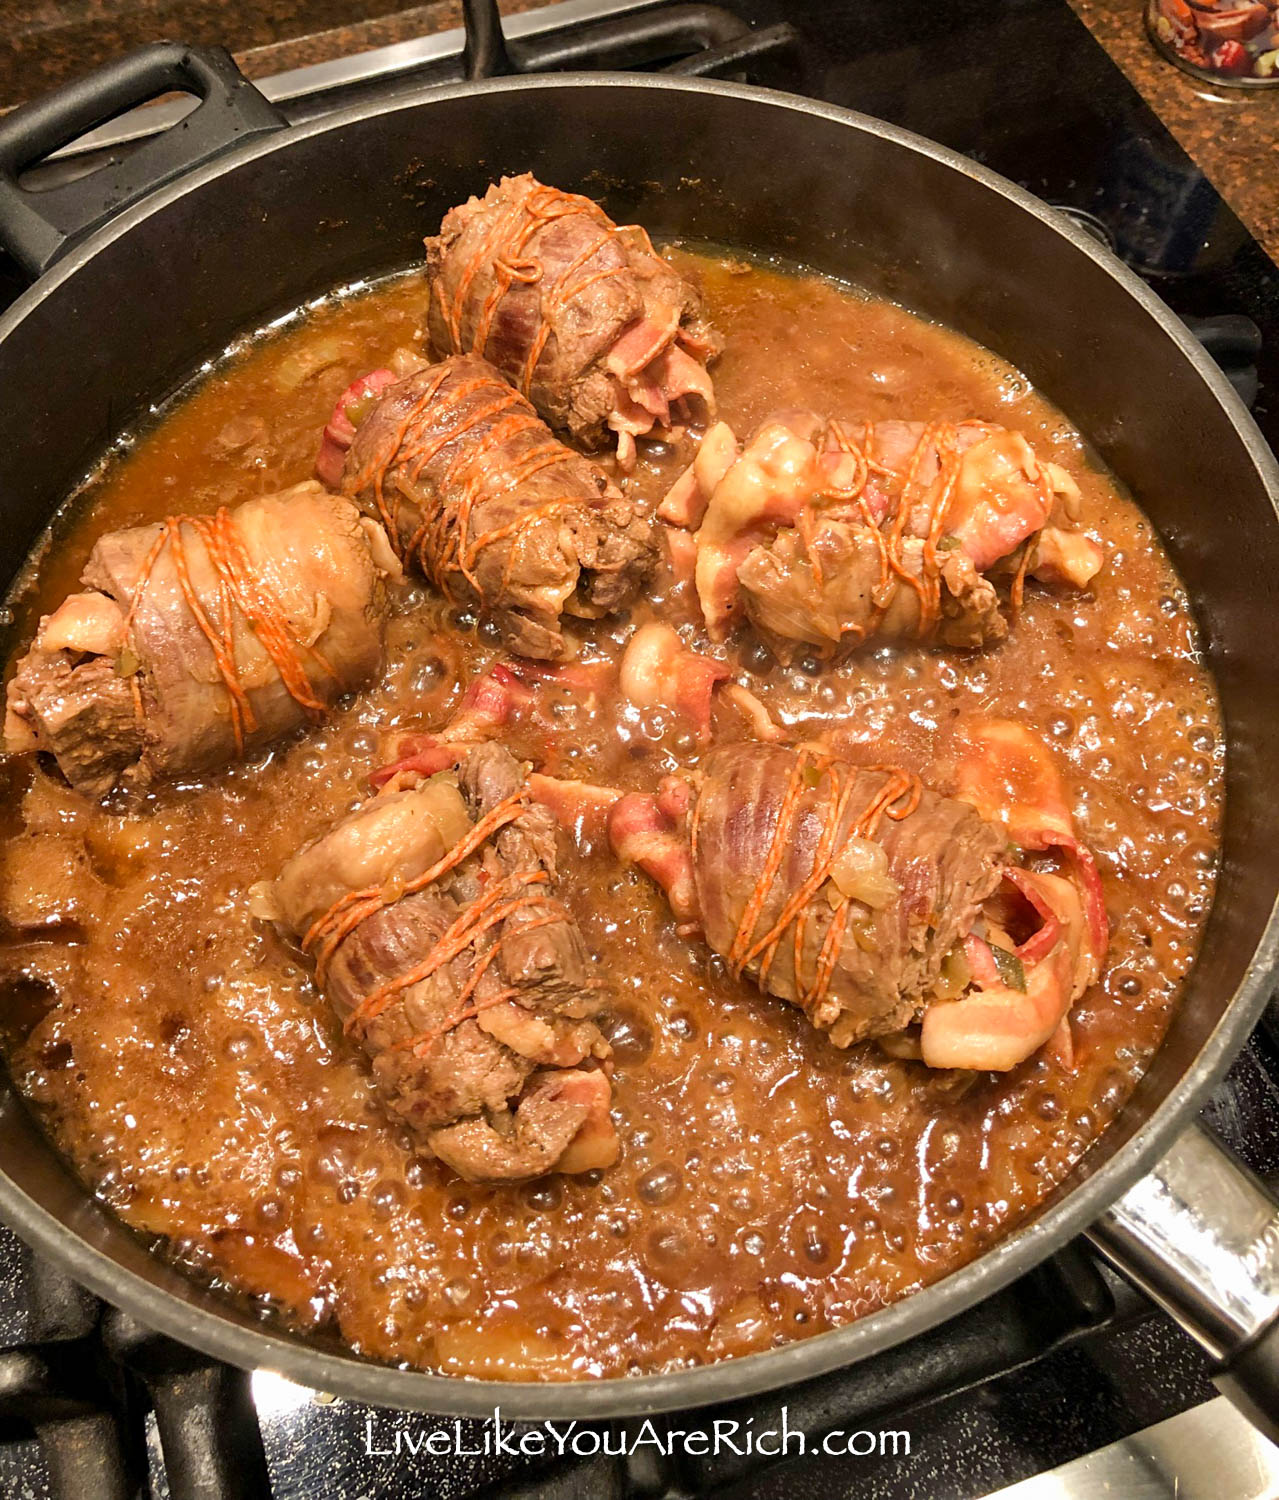 Authentic German rouladen and gravy in the skillet